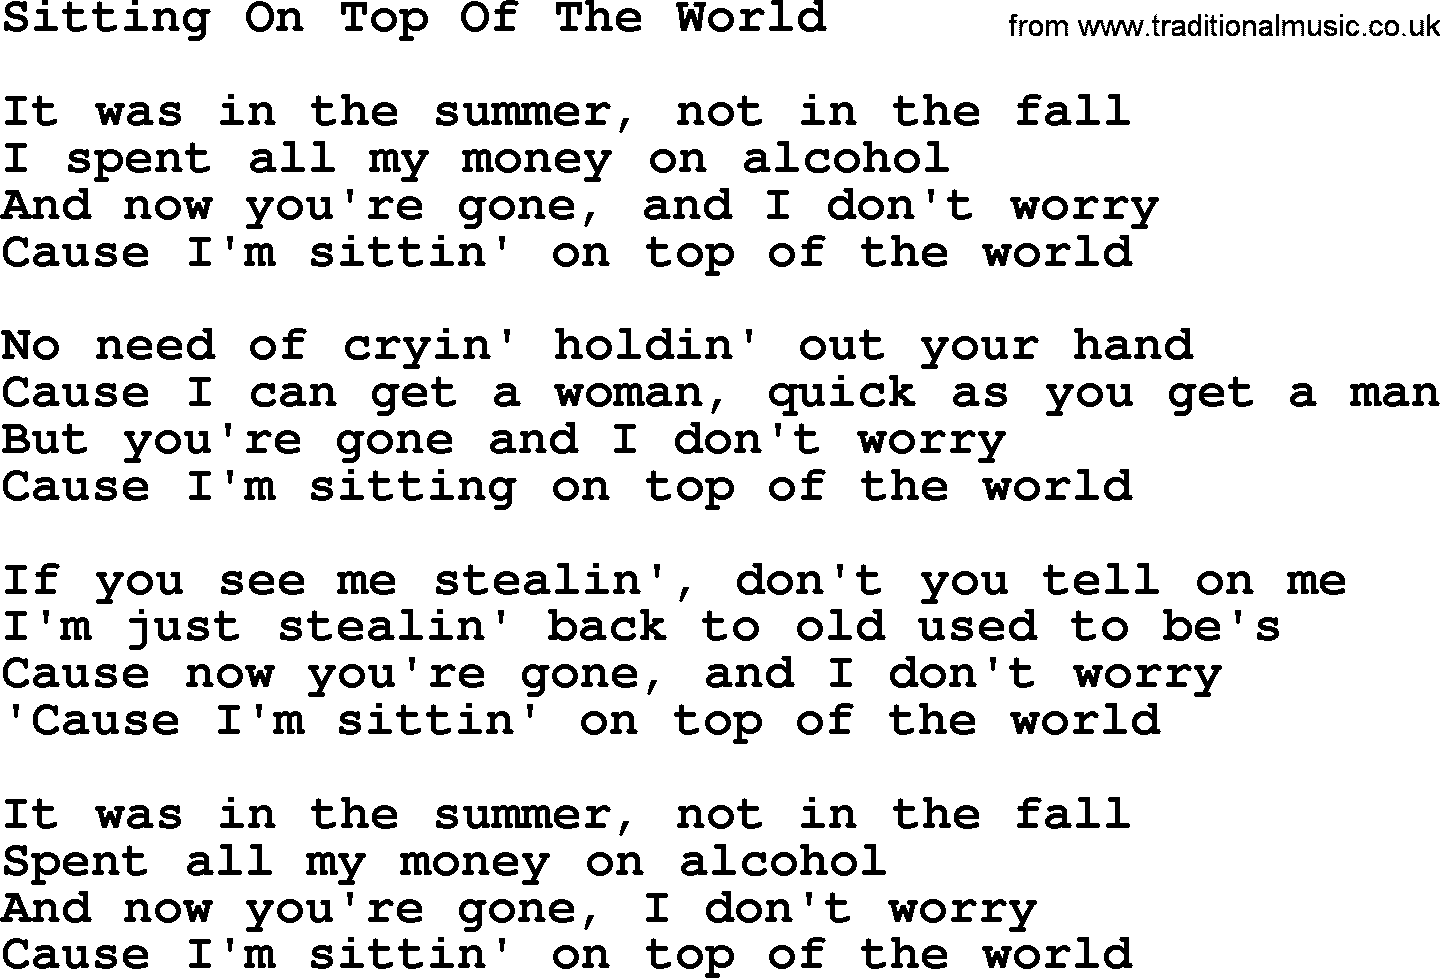 Willie Nelson song: Sitting On Top Of The World lyrics